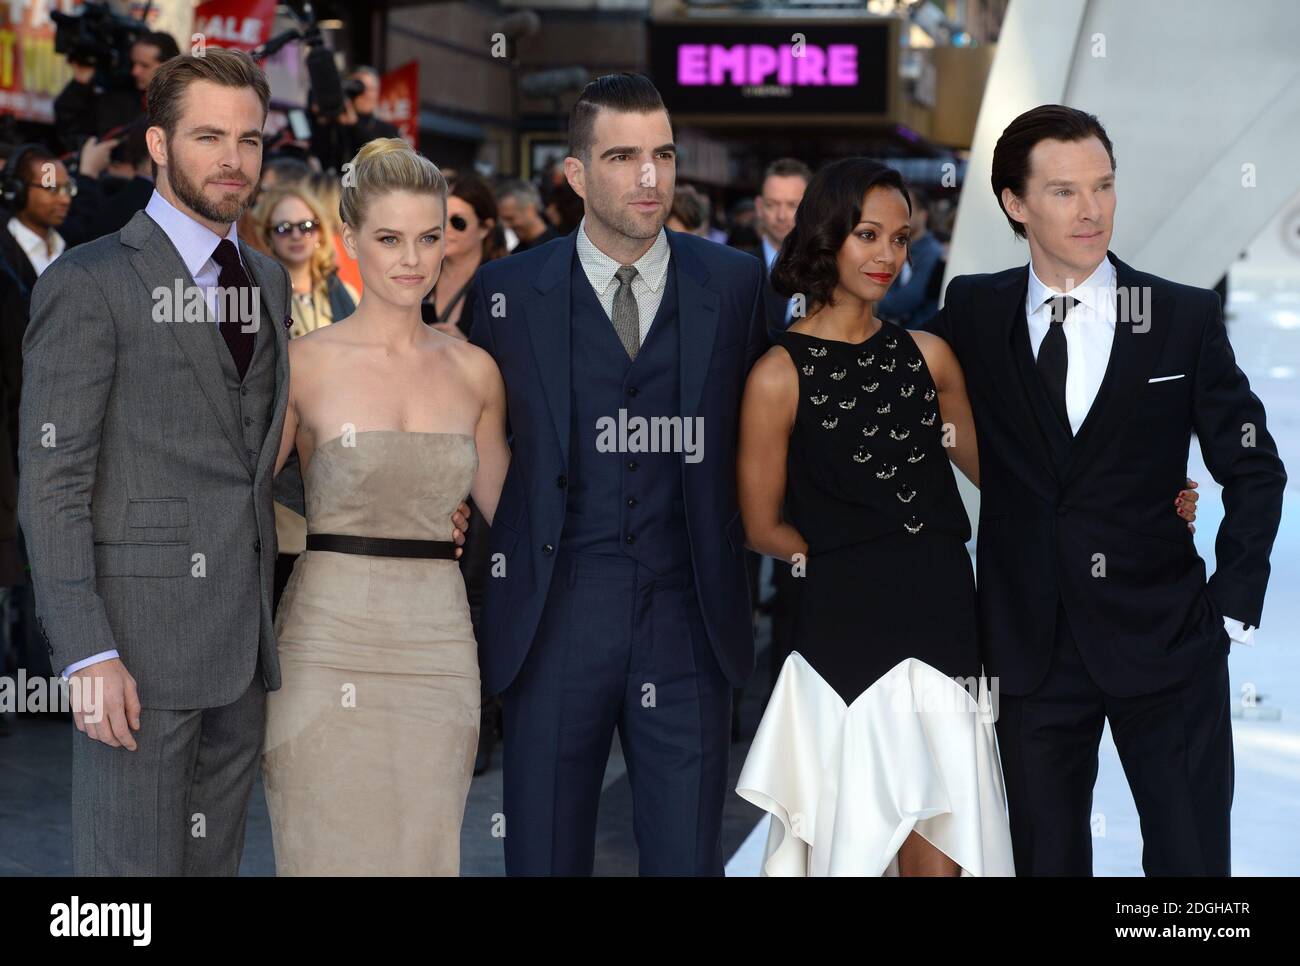 Chris Pine, Alice Eve, Zachary Quinto, Zoe Saldana and Benedict Cumberbatch arriving at the premiere of Star Trek Into Darkness 3D, Empire Cinema, Leicester Square, London.   Stock Photo